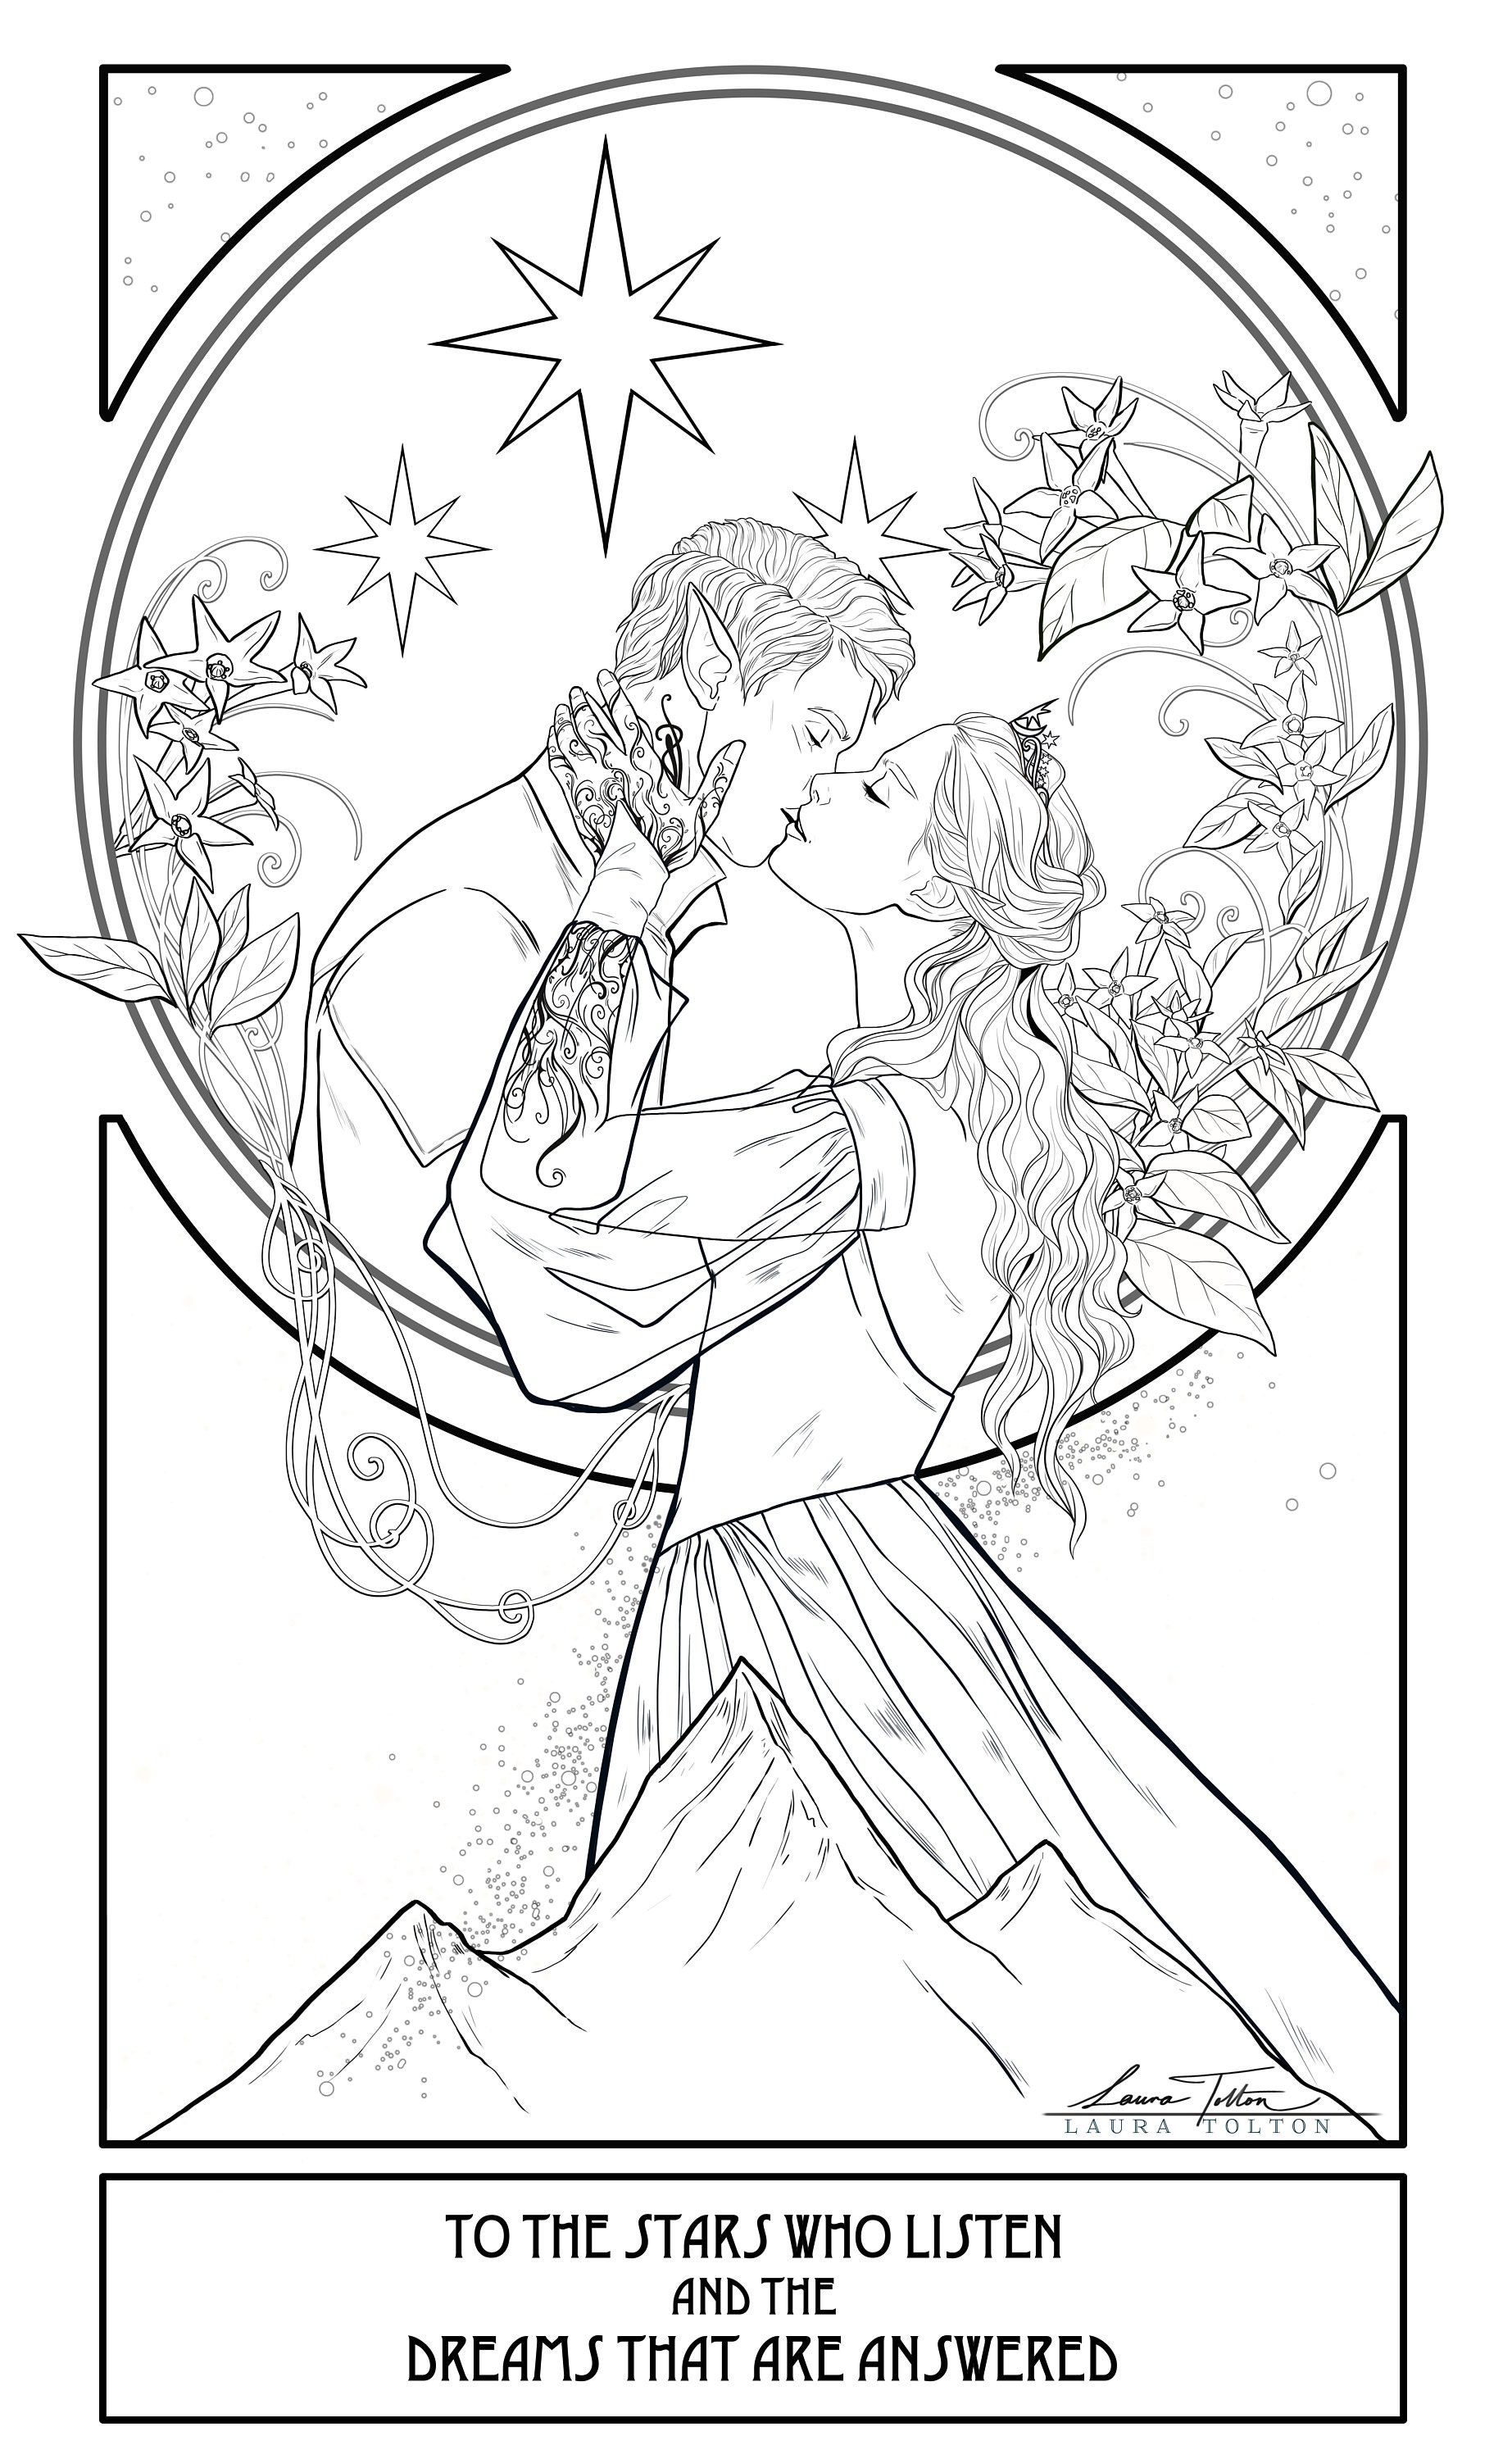 ACOTAR coloring book, completed page